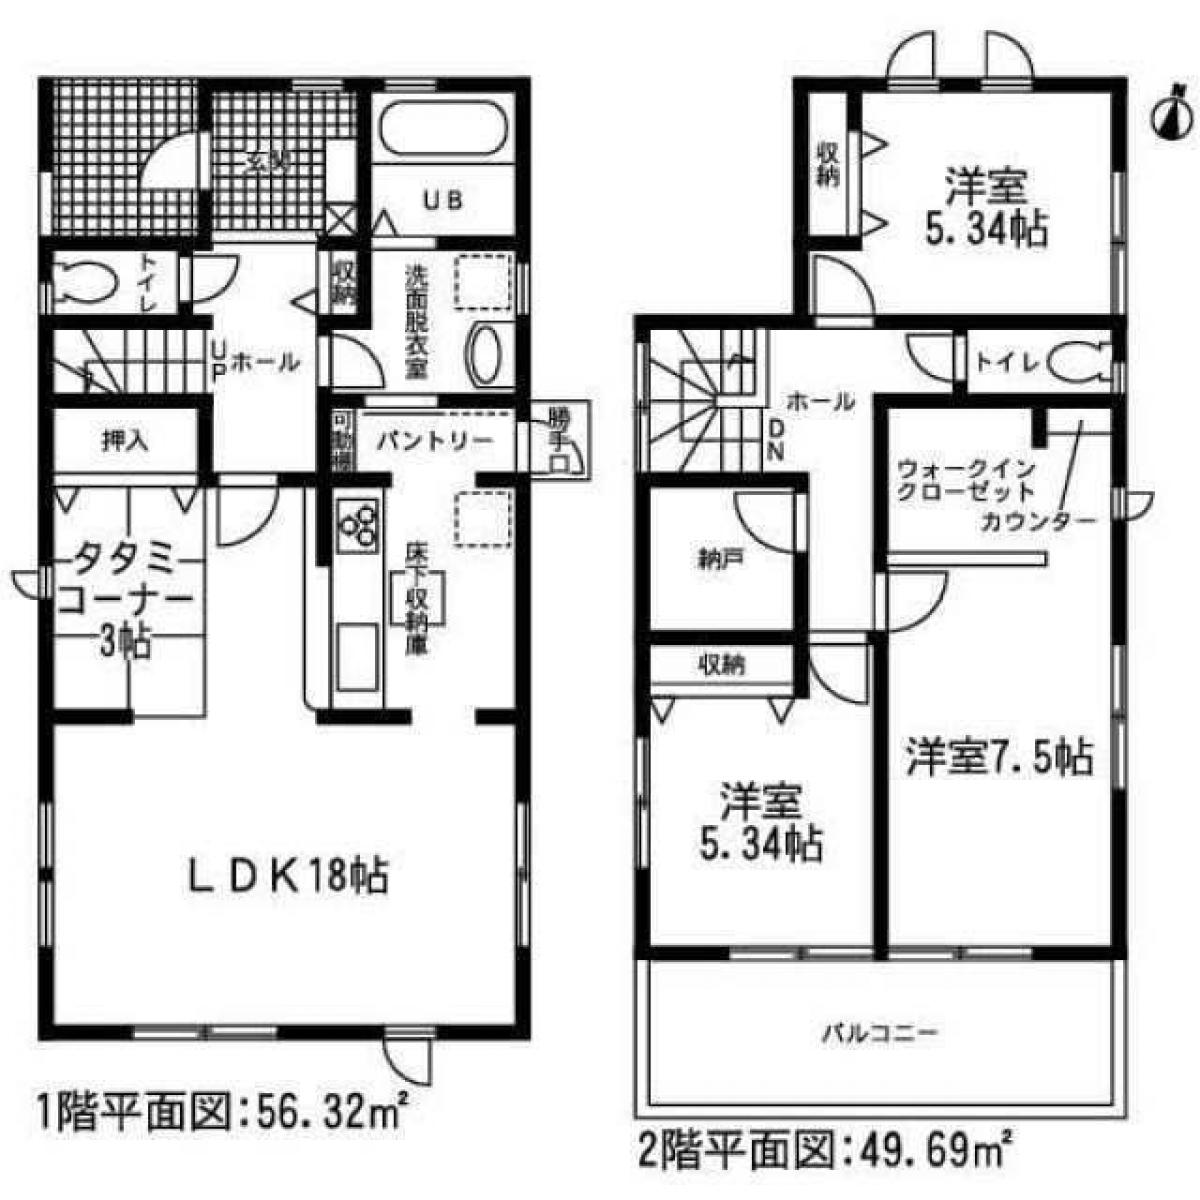 Picture of Home For Sale in Toyota Shi, Aichi, Japan